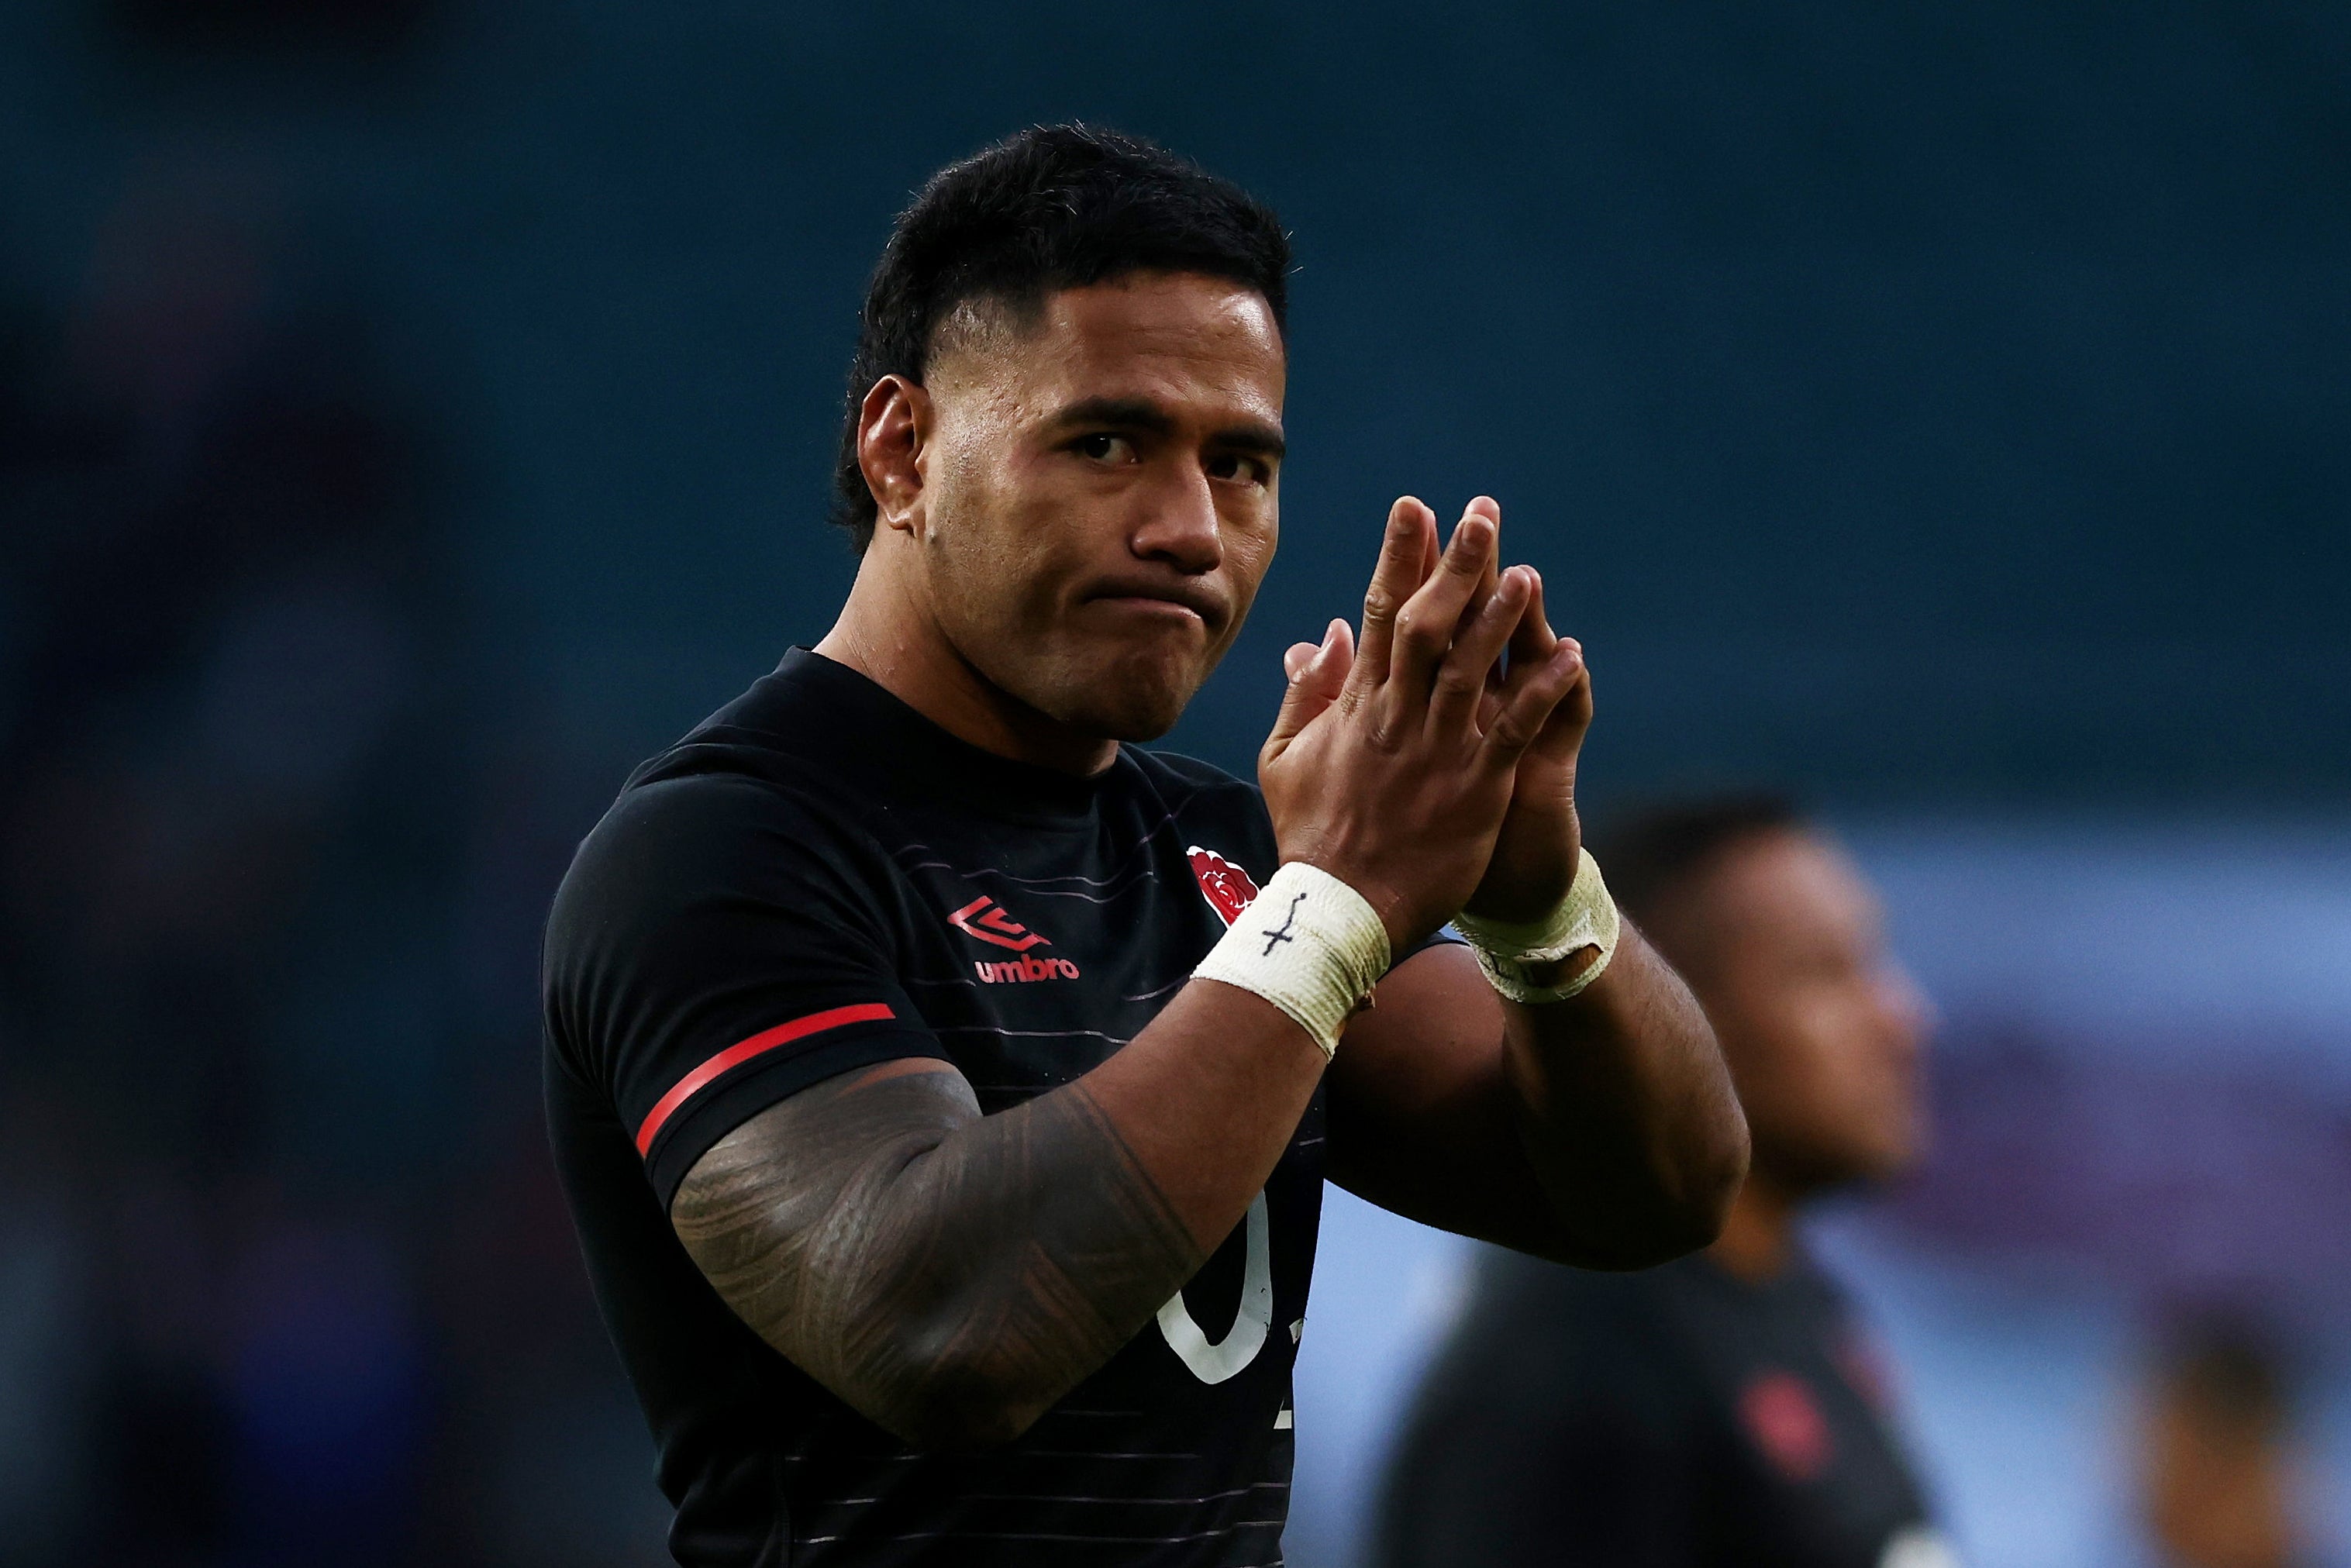 Tuilagi is one of five changes to the team that lost to Argentina at Twickenham last weekend